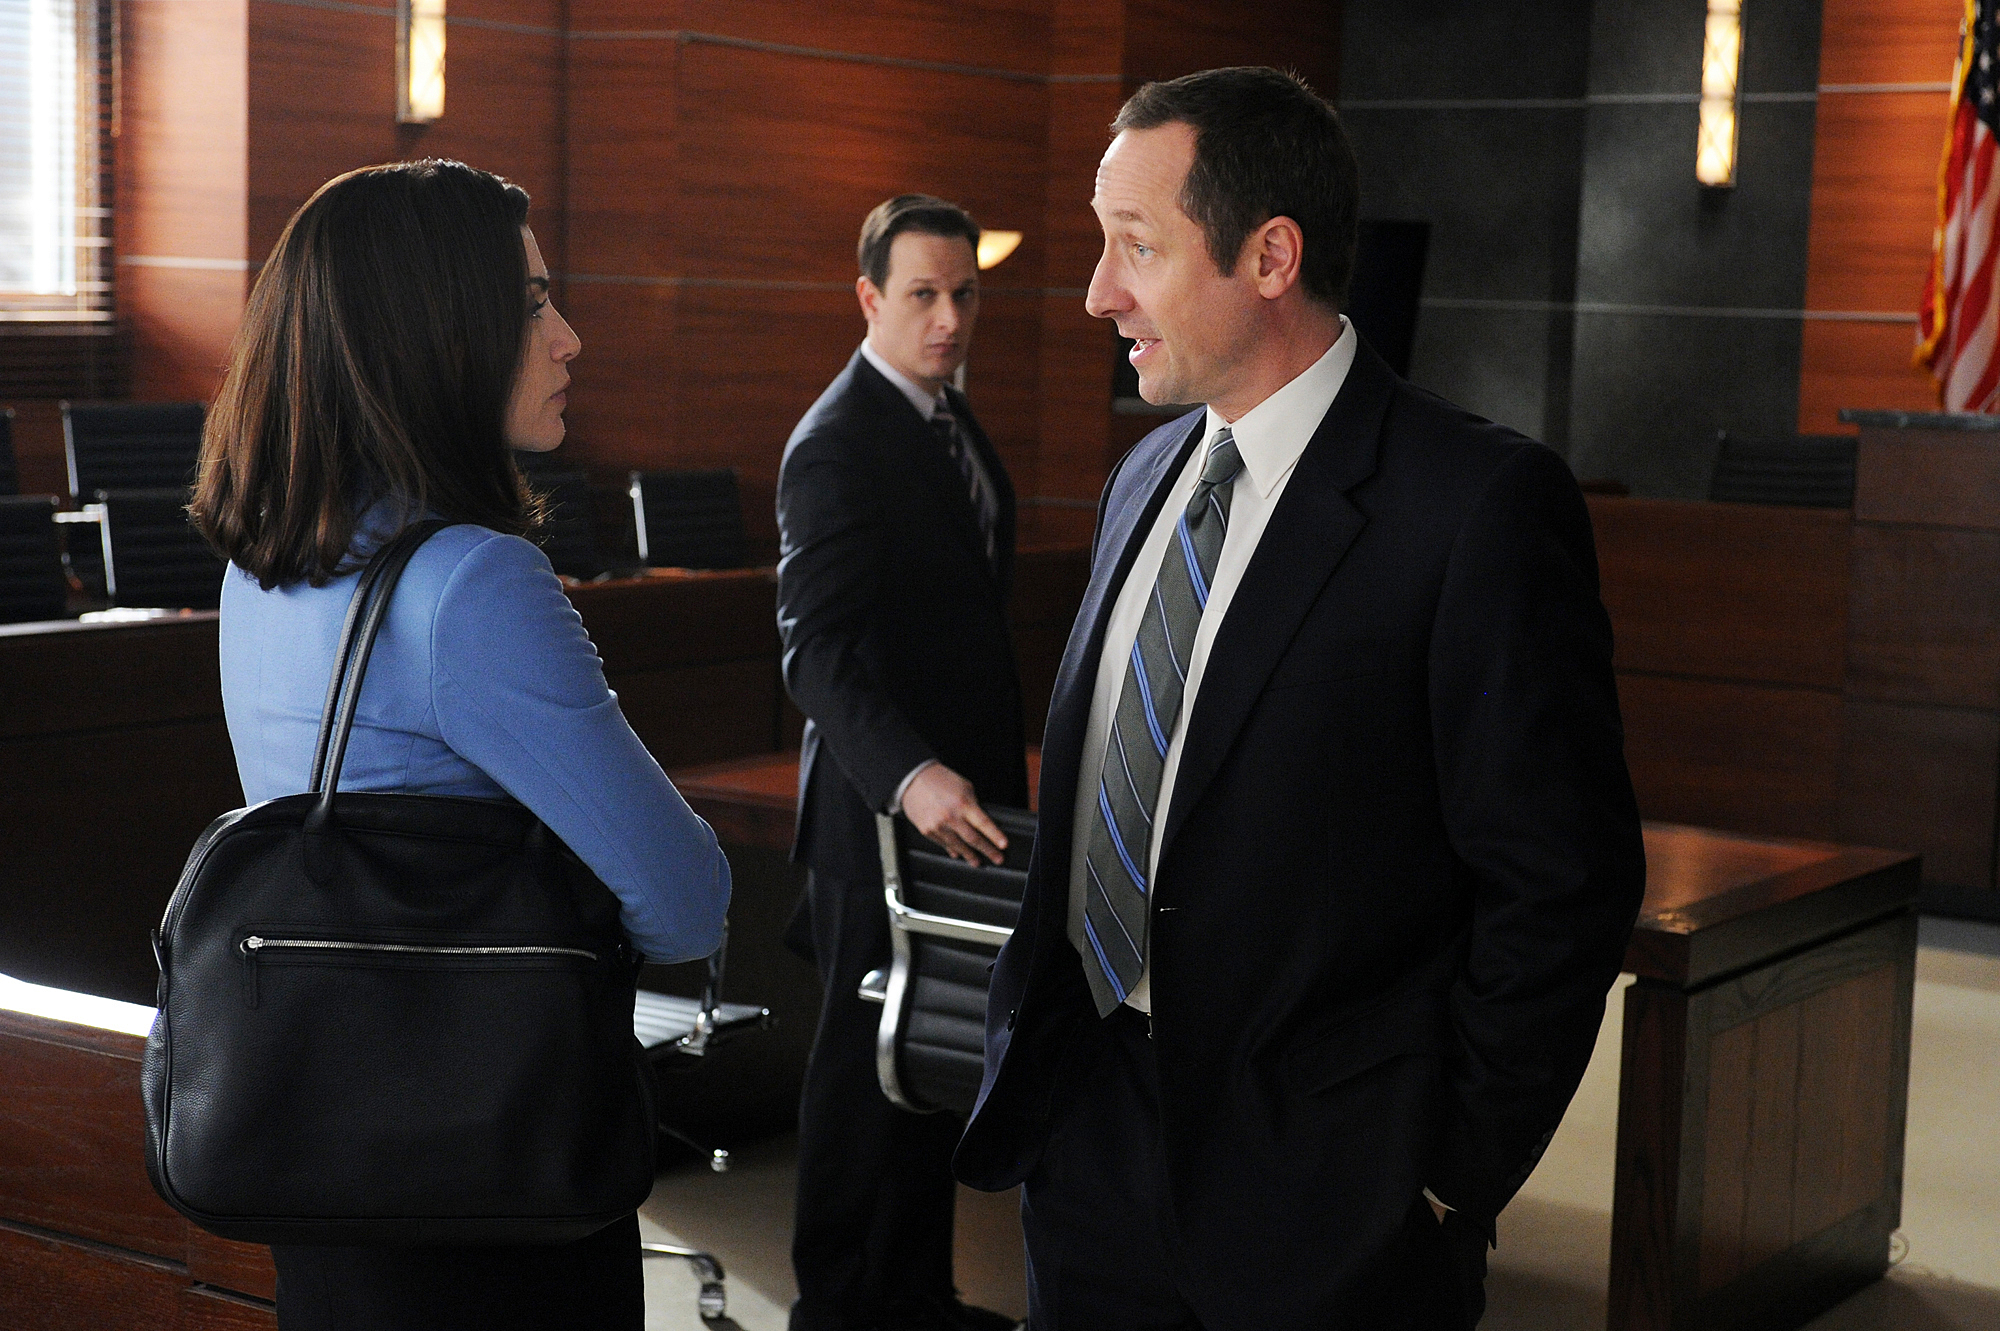 Still of Julianna Margulies, Josh Charles and Sam Robards in The Good Wife (2009)